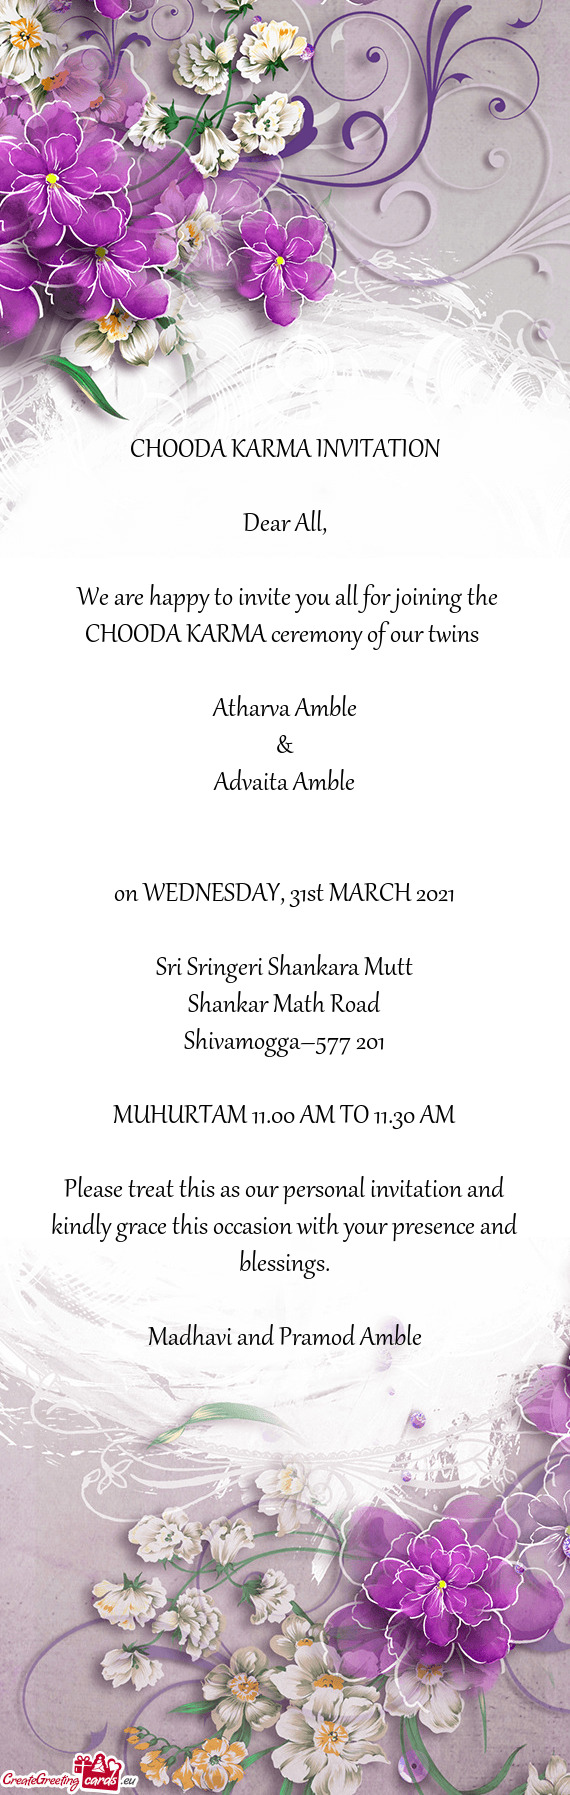 We are happy to invite you all for joining the CHOODA KARMA ceremony of our twins